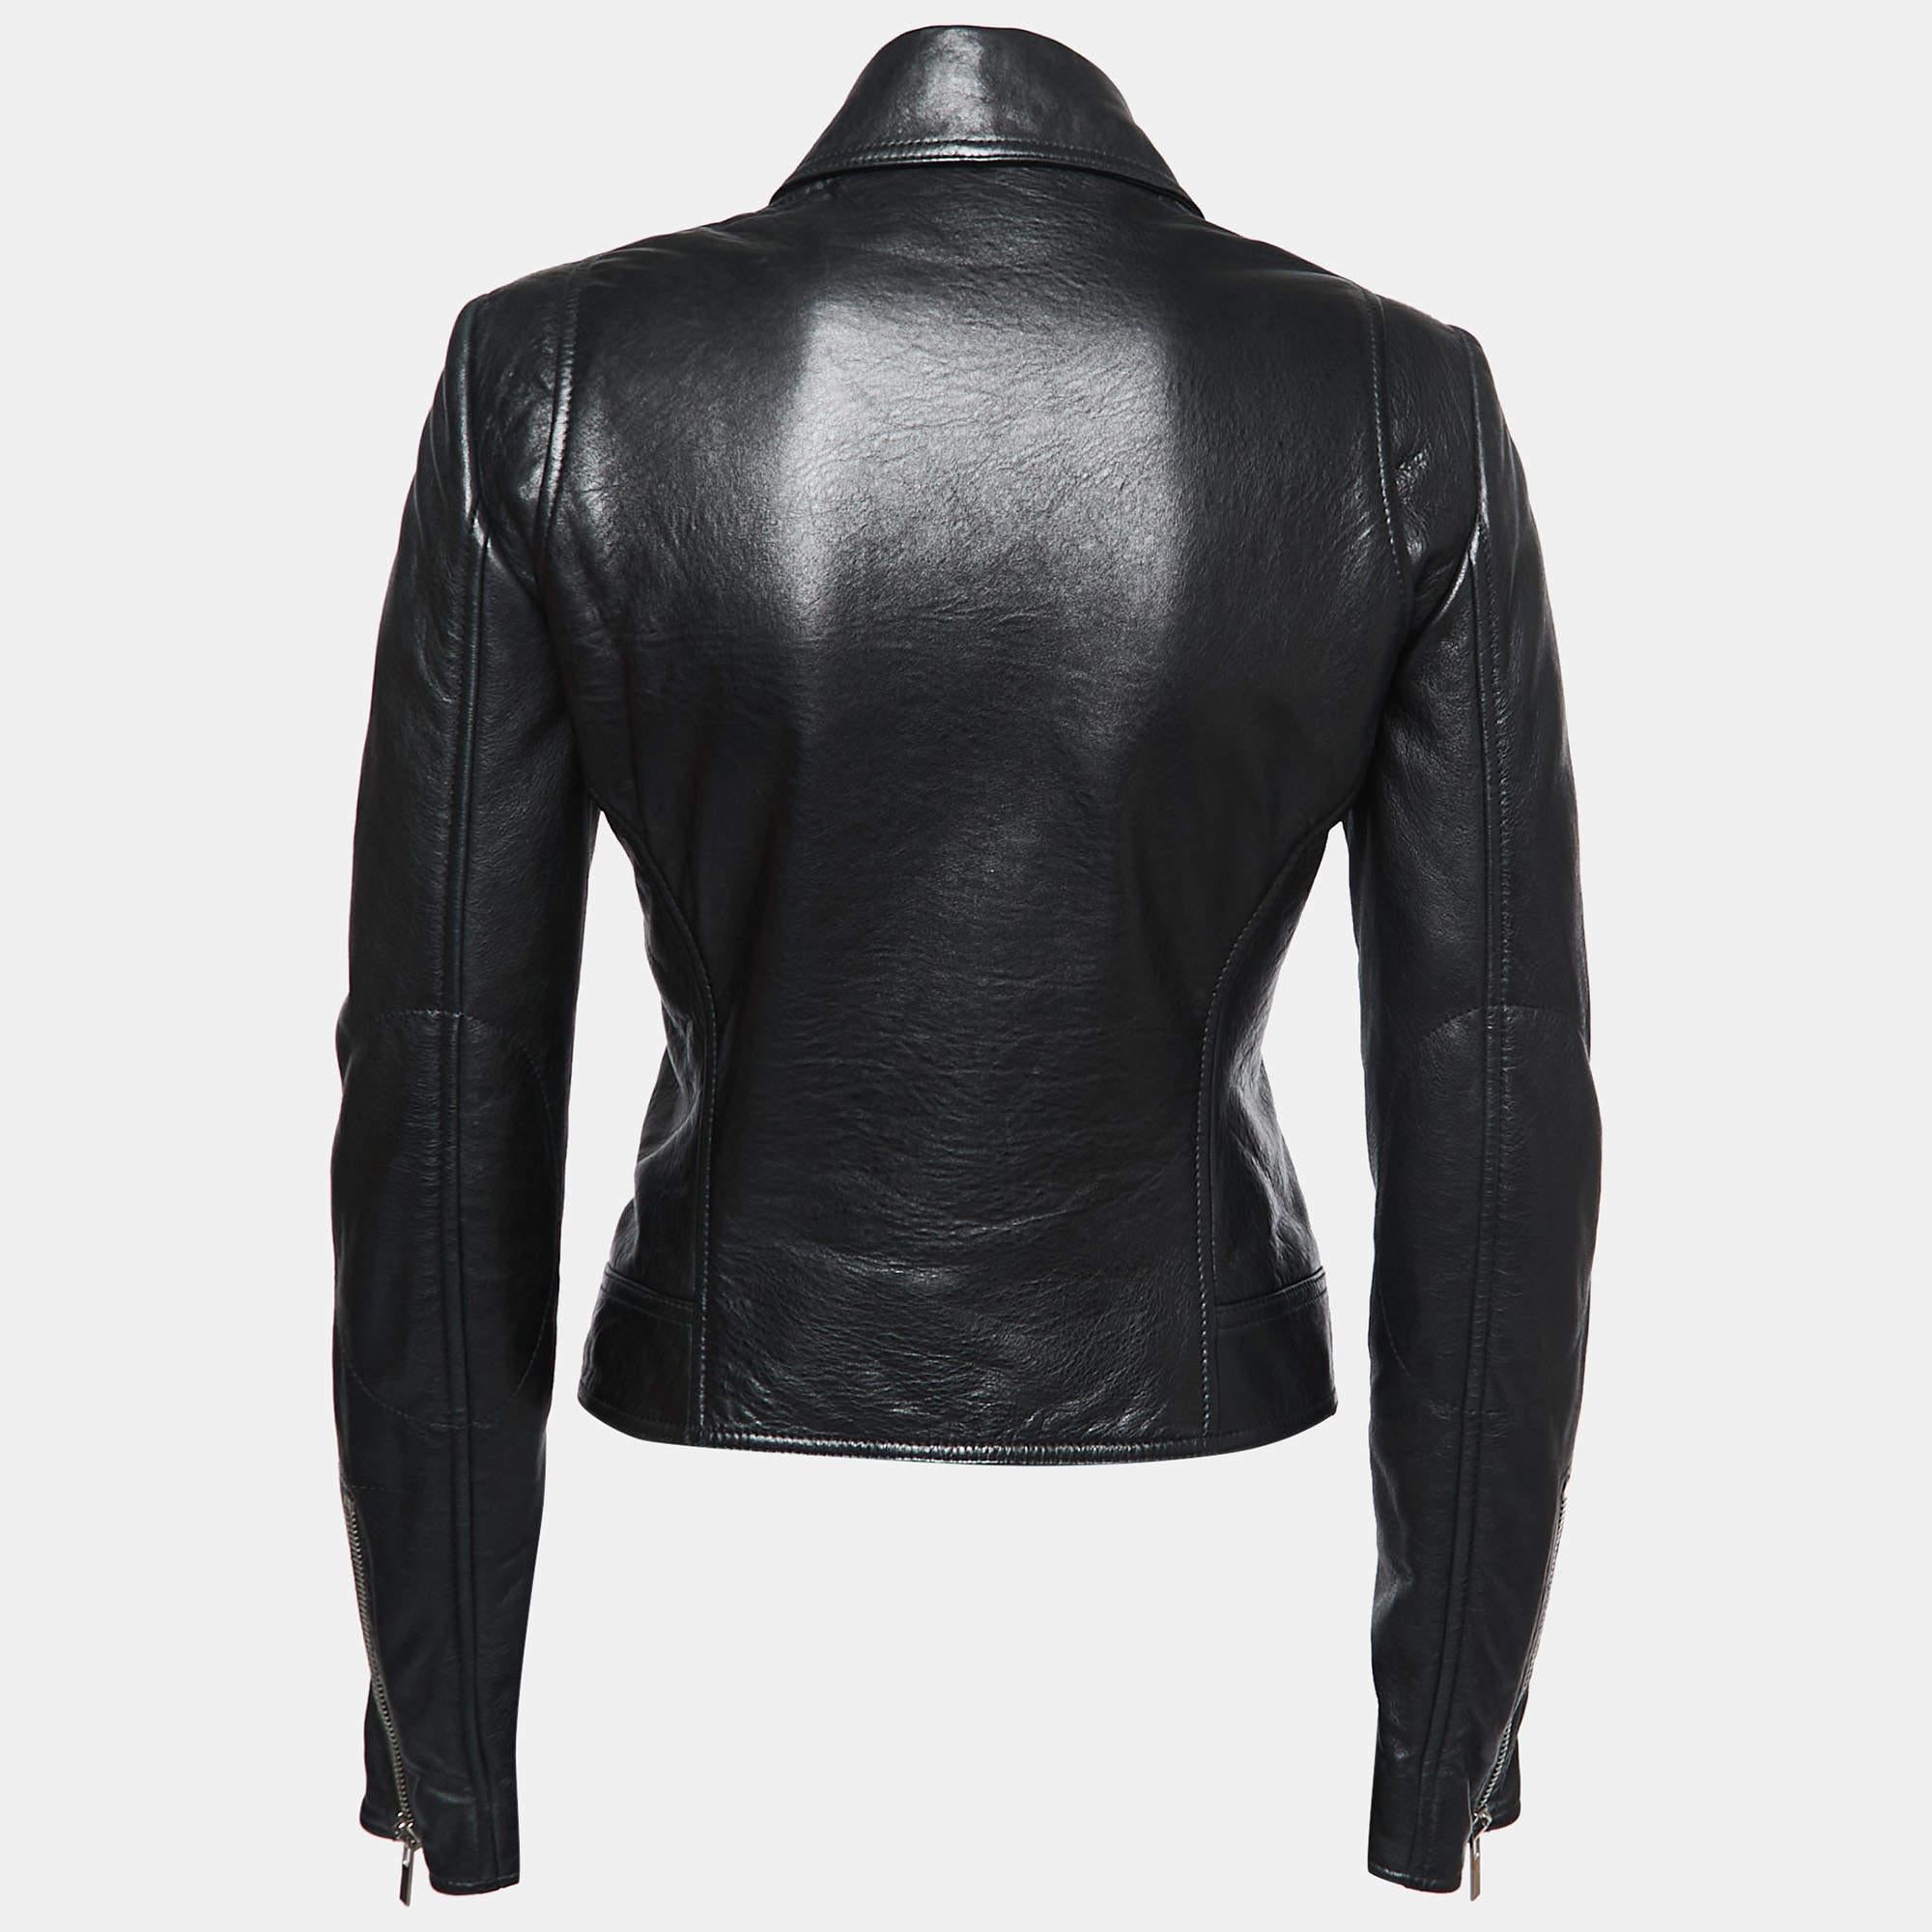 Smart, sturdy, and stylish, this Biker jacket from the House of Balenciaga will add a trendy touch to all your sporty looks! It is designed from black leather. It flaunts a zip-front feature, long sleeves, and two pockets. Wear this stunning